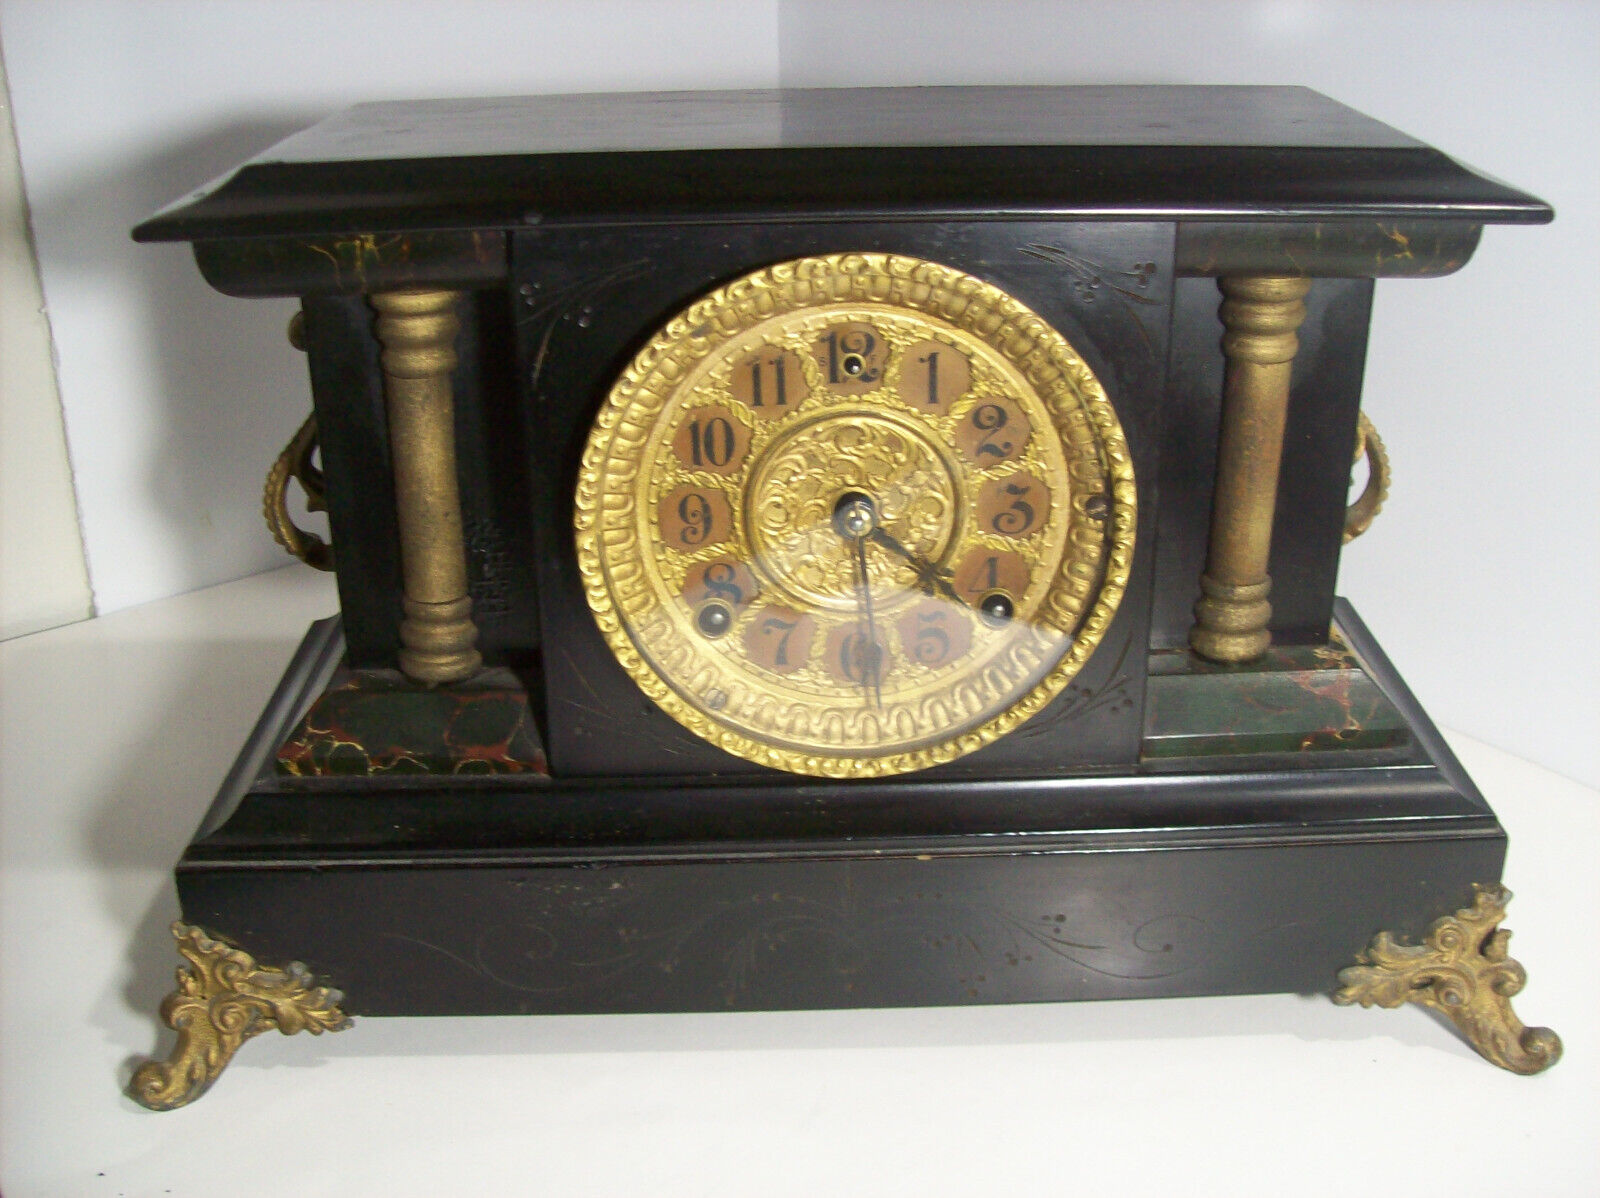 ANTIQUE SESSIONS MANTLE CLOCK, 8 Day, Cathedral Gong Strikes On The Hour, AS IS